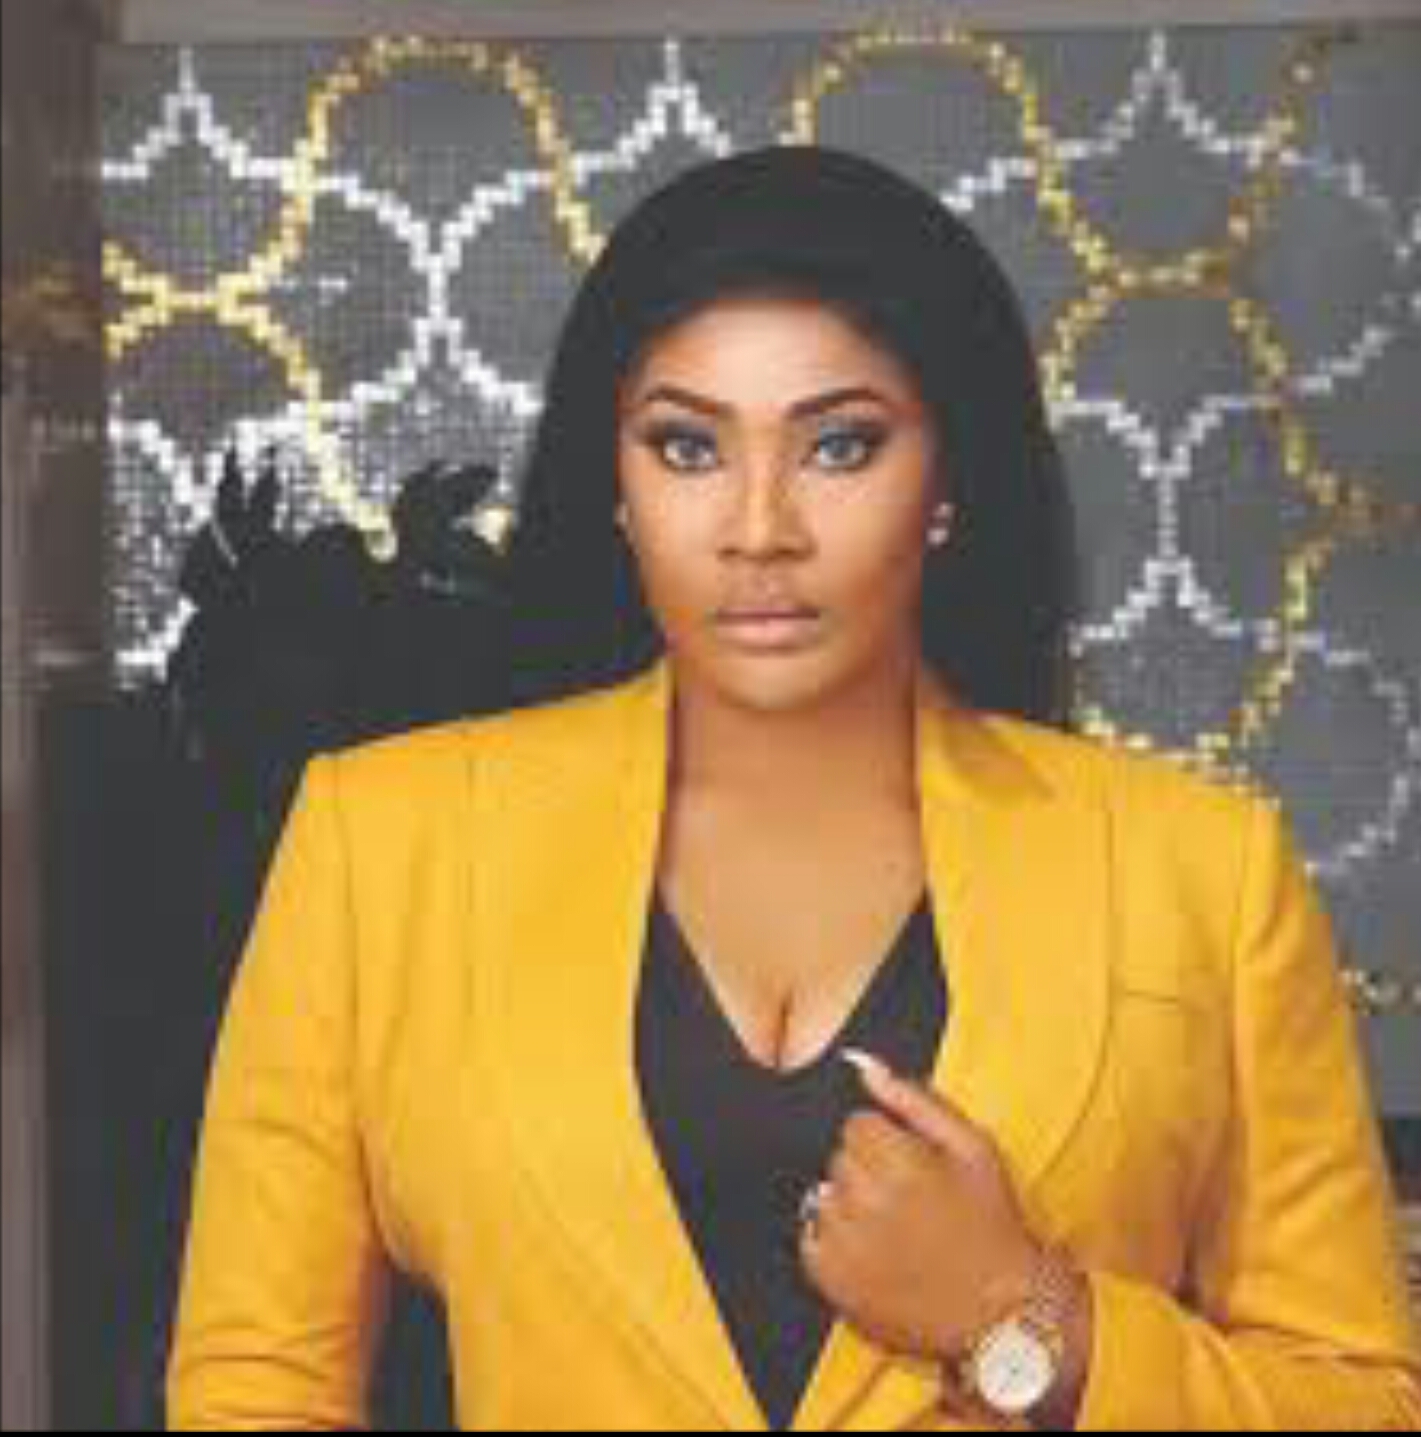 Angela Okorie discloses the kind of people who get hurt the most